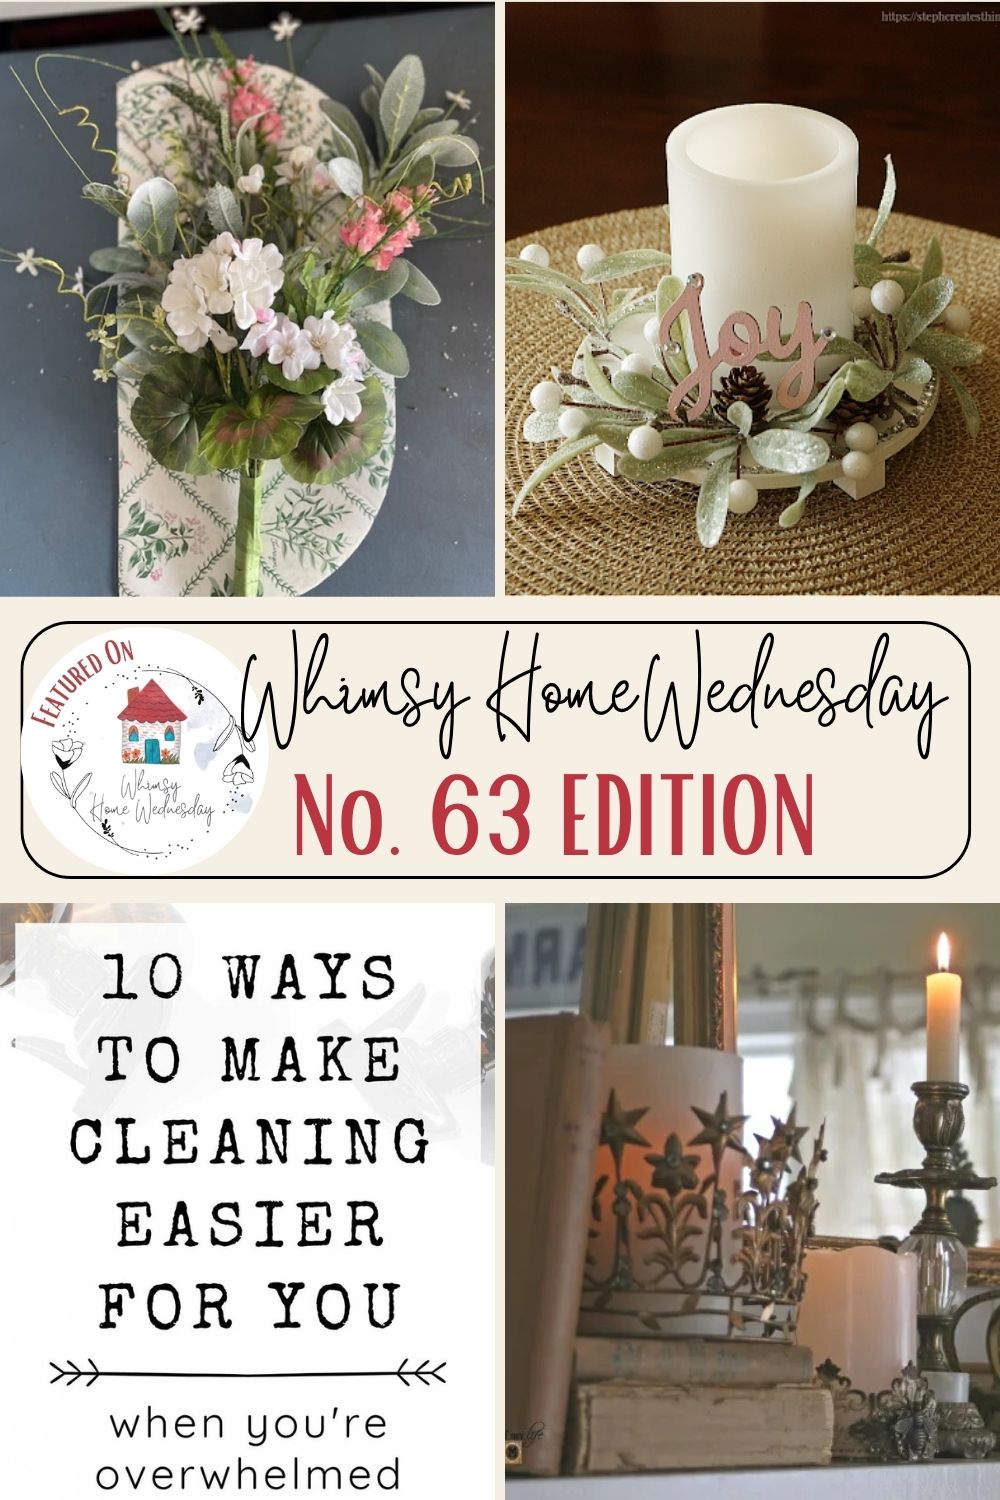 Join us on Whimsy Home Wednesday Blog Link Party No. 63 and see host projects, the features from the previous week and link up your posts!